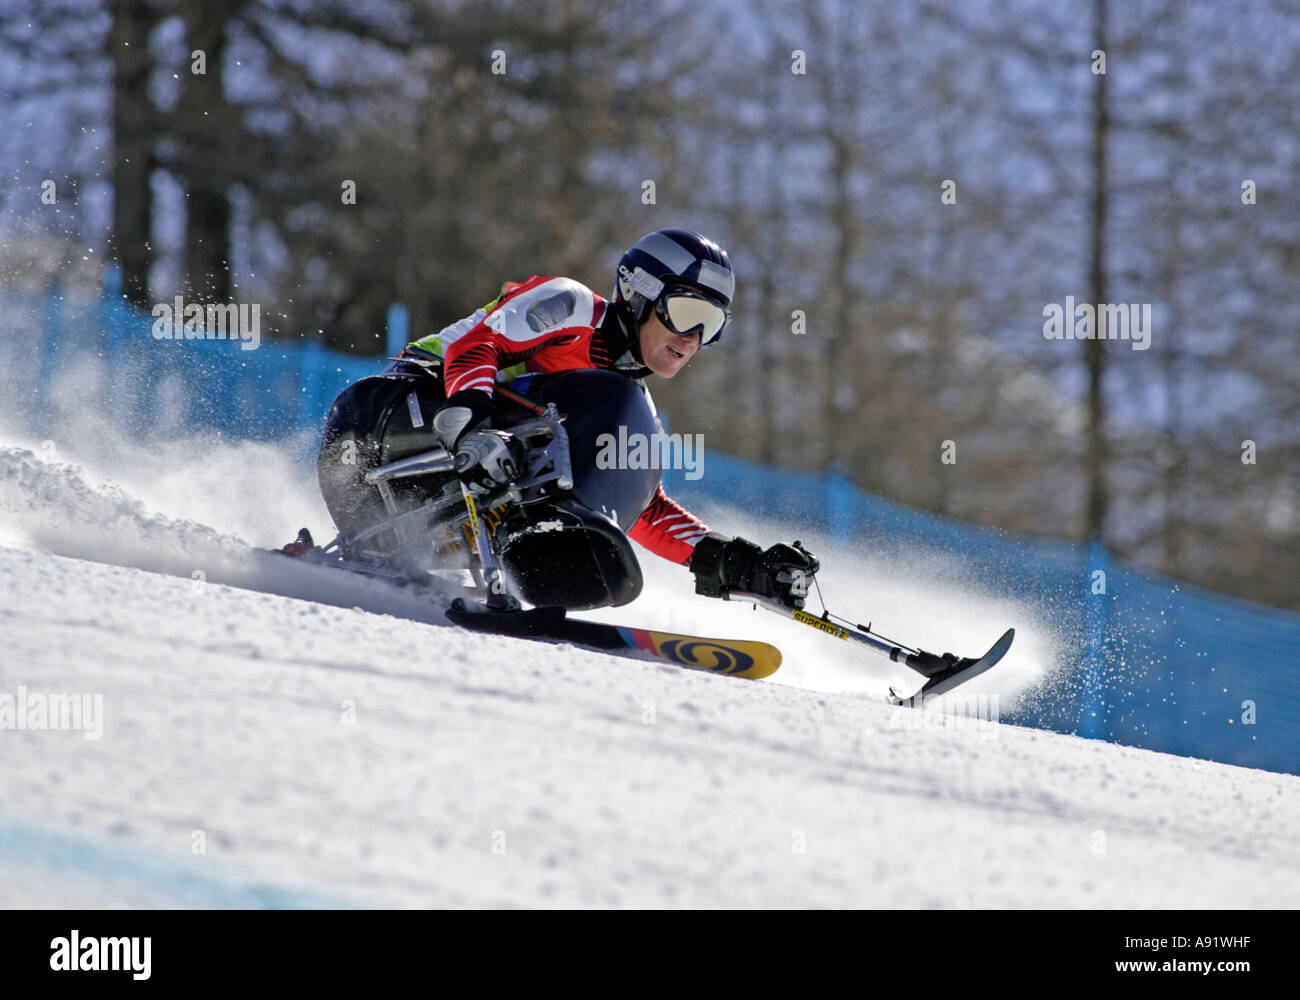 Thomas Bechter LW10 1 of Austria in the Mens Alpine Skiing Super G Sitting competition Stock Photo